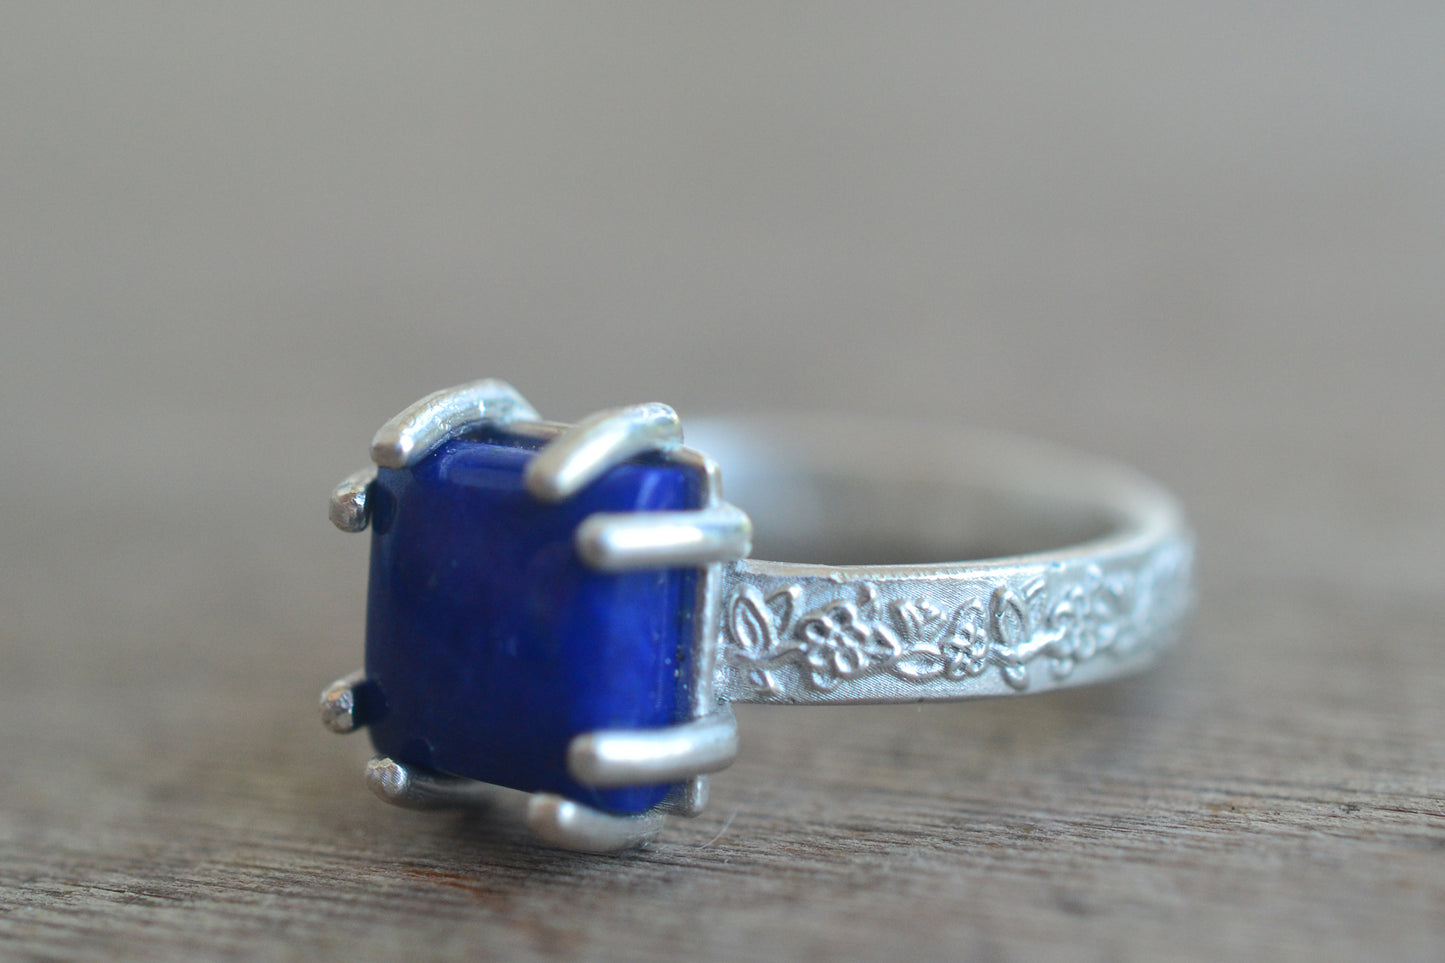 Square Lapis Lazuli Ring in Sterling Silver